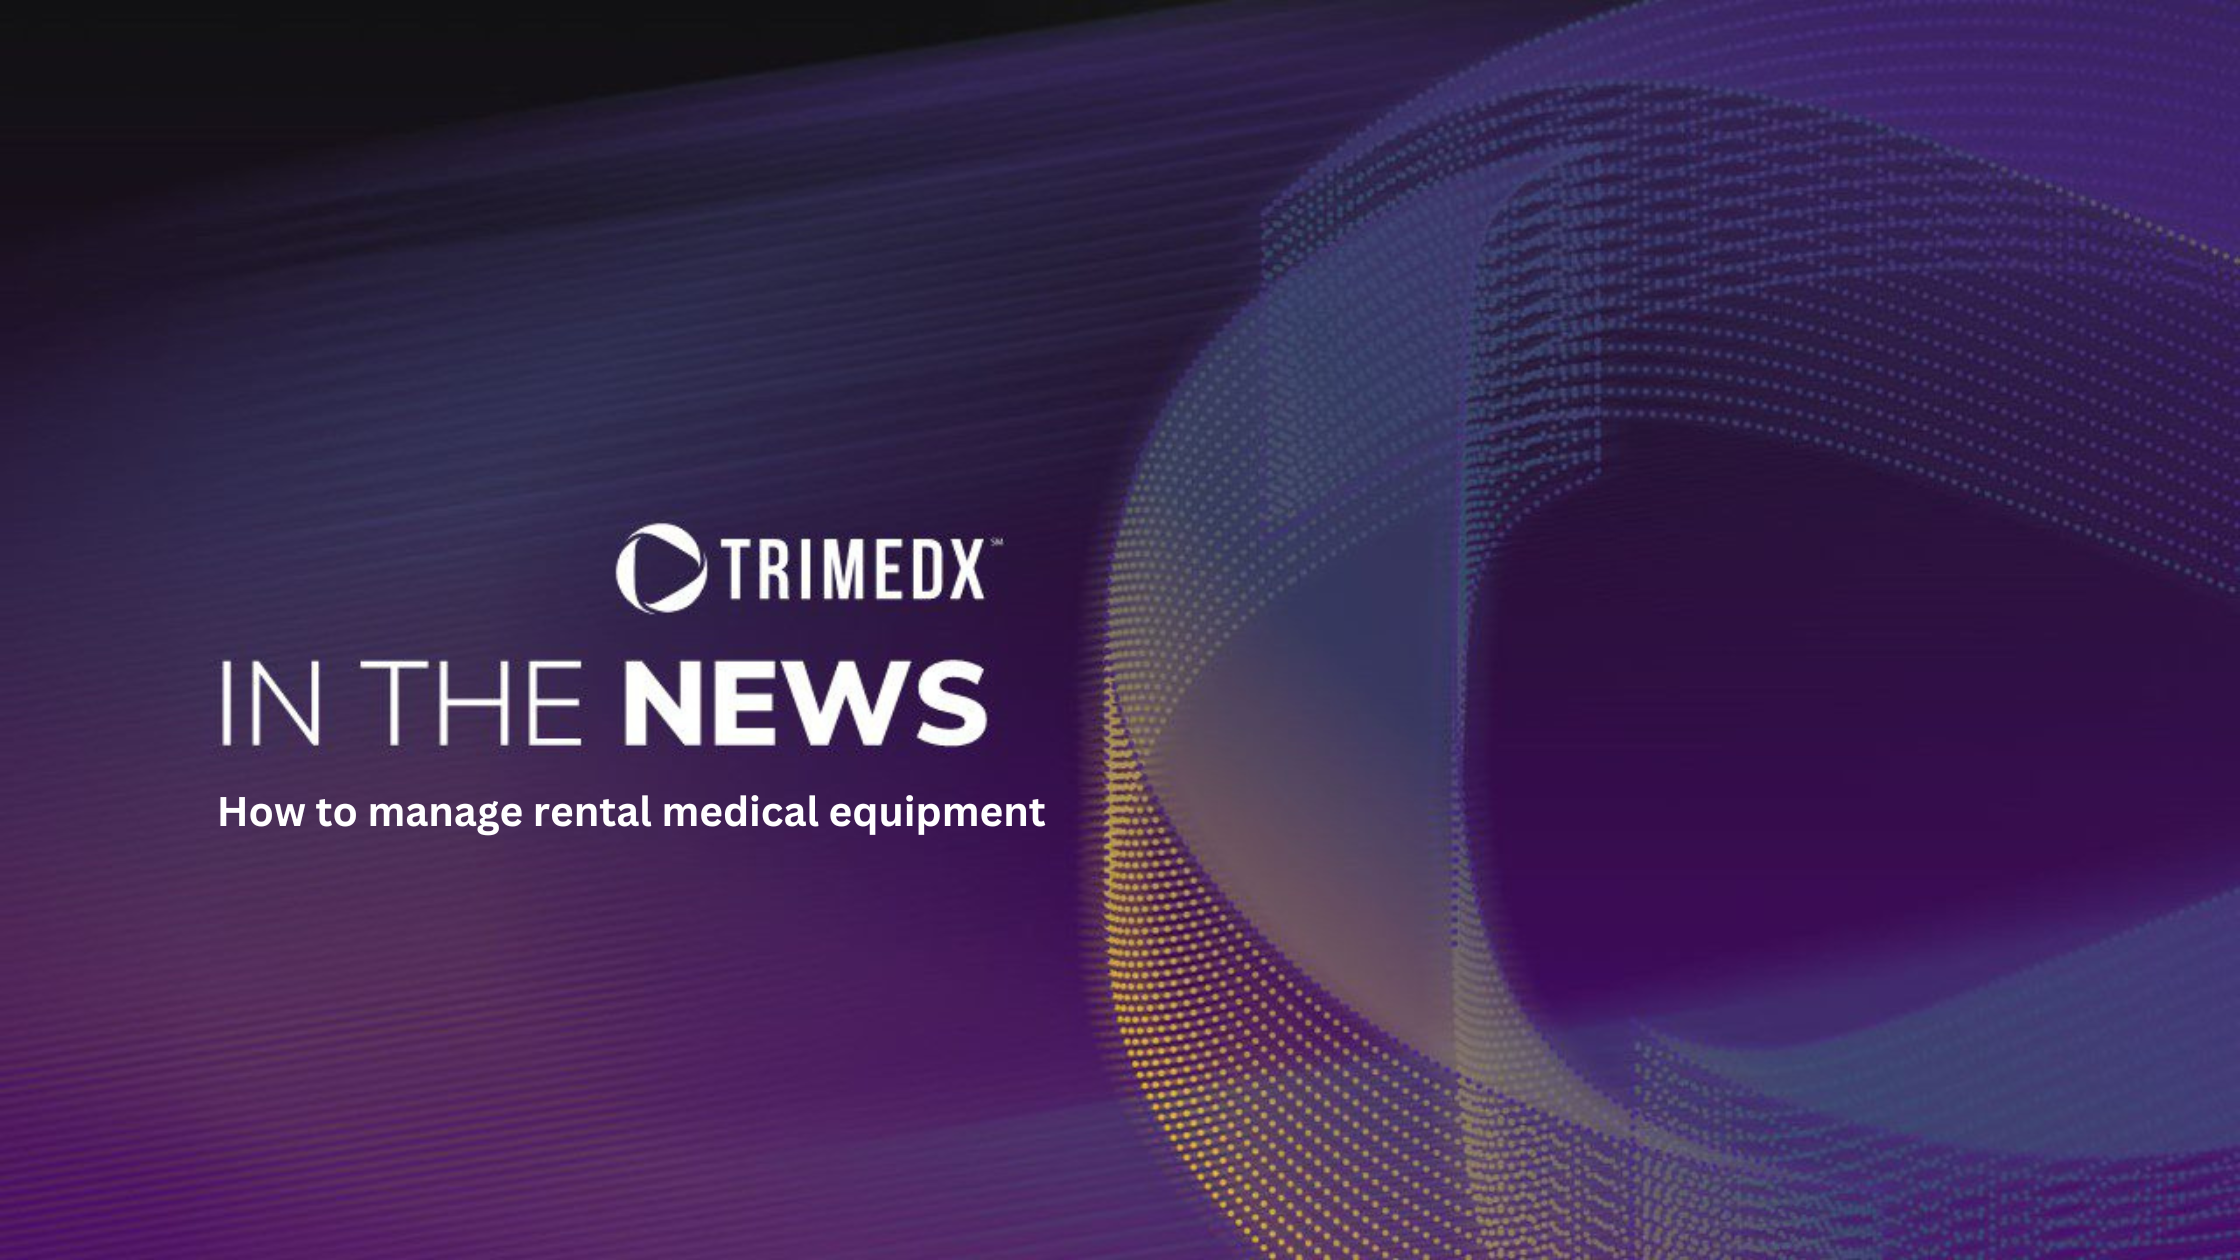 How to manage rental medical equipment (In the news purple graphic, TRIMEDX logo)